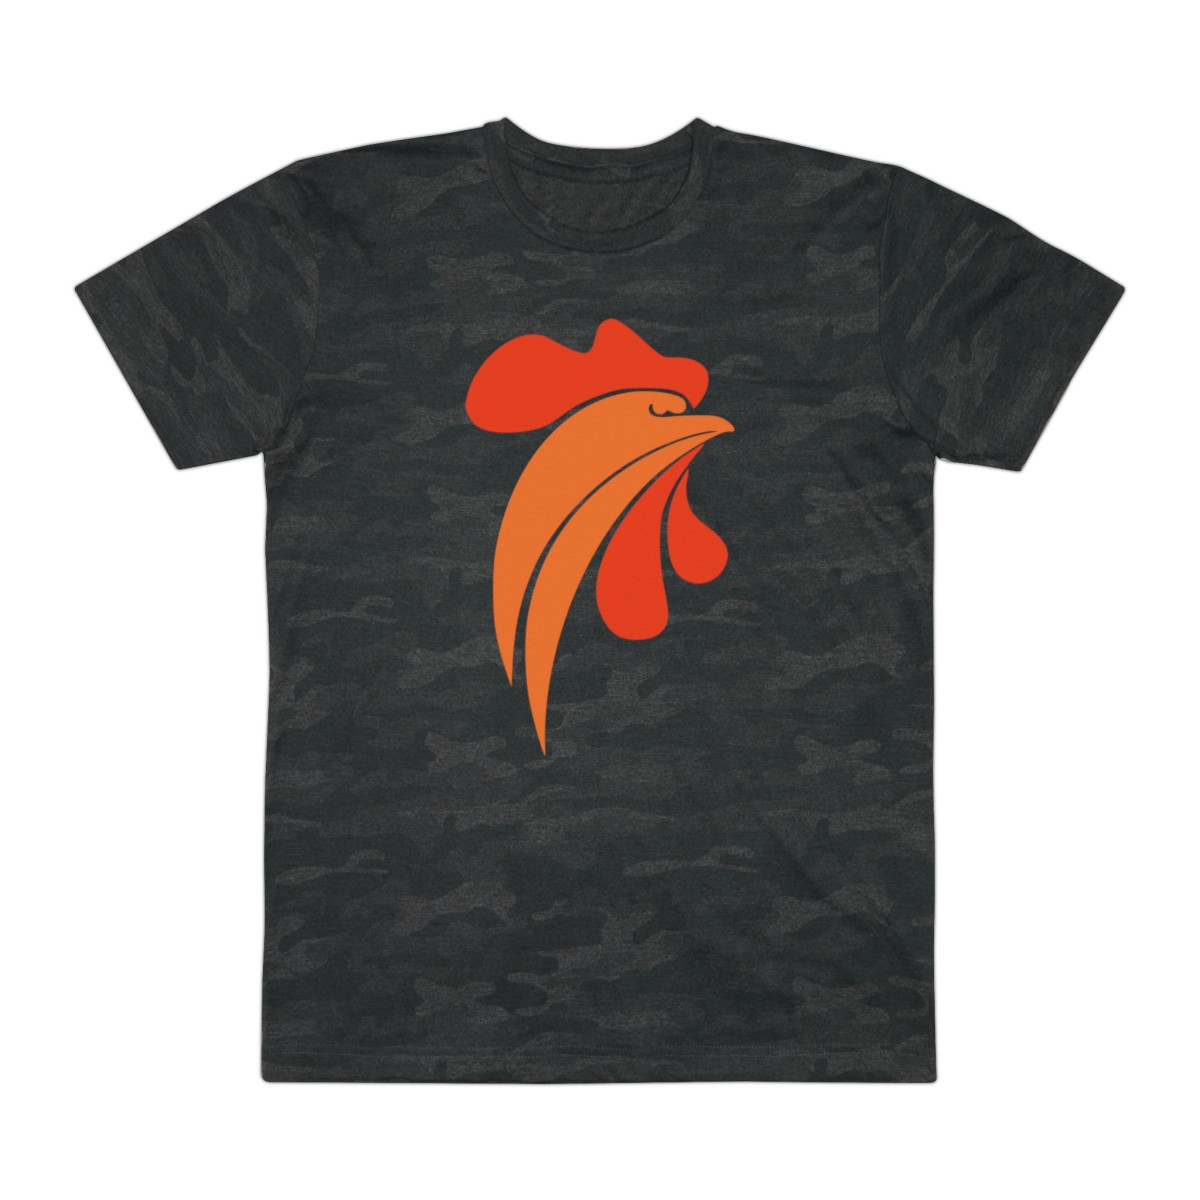 The Compassionate Activist Network Rooster Returns in this Men's Fine Jersey Tee product thumbnail image